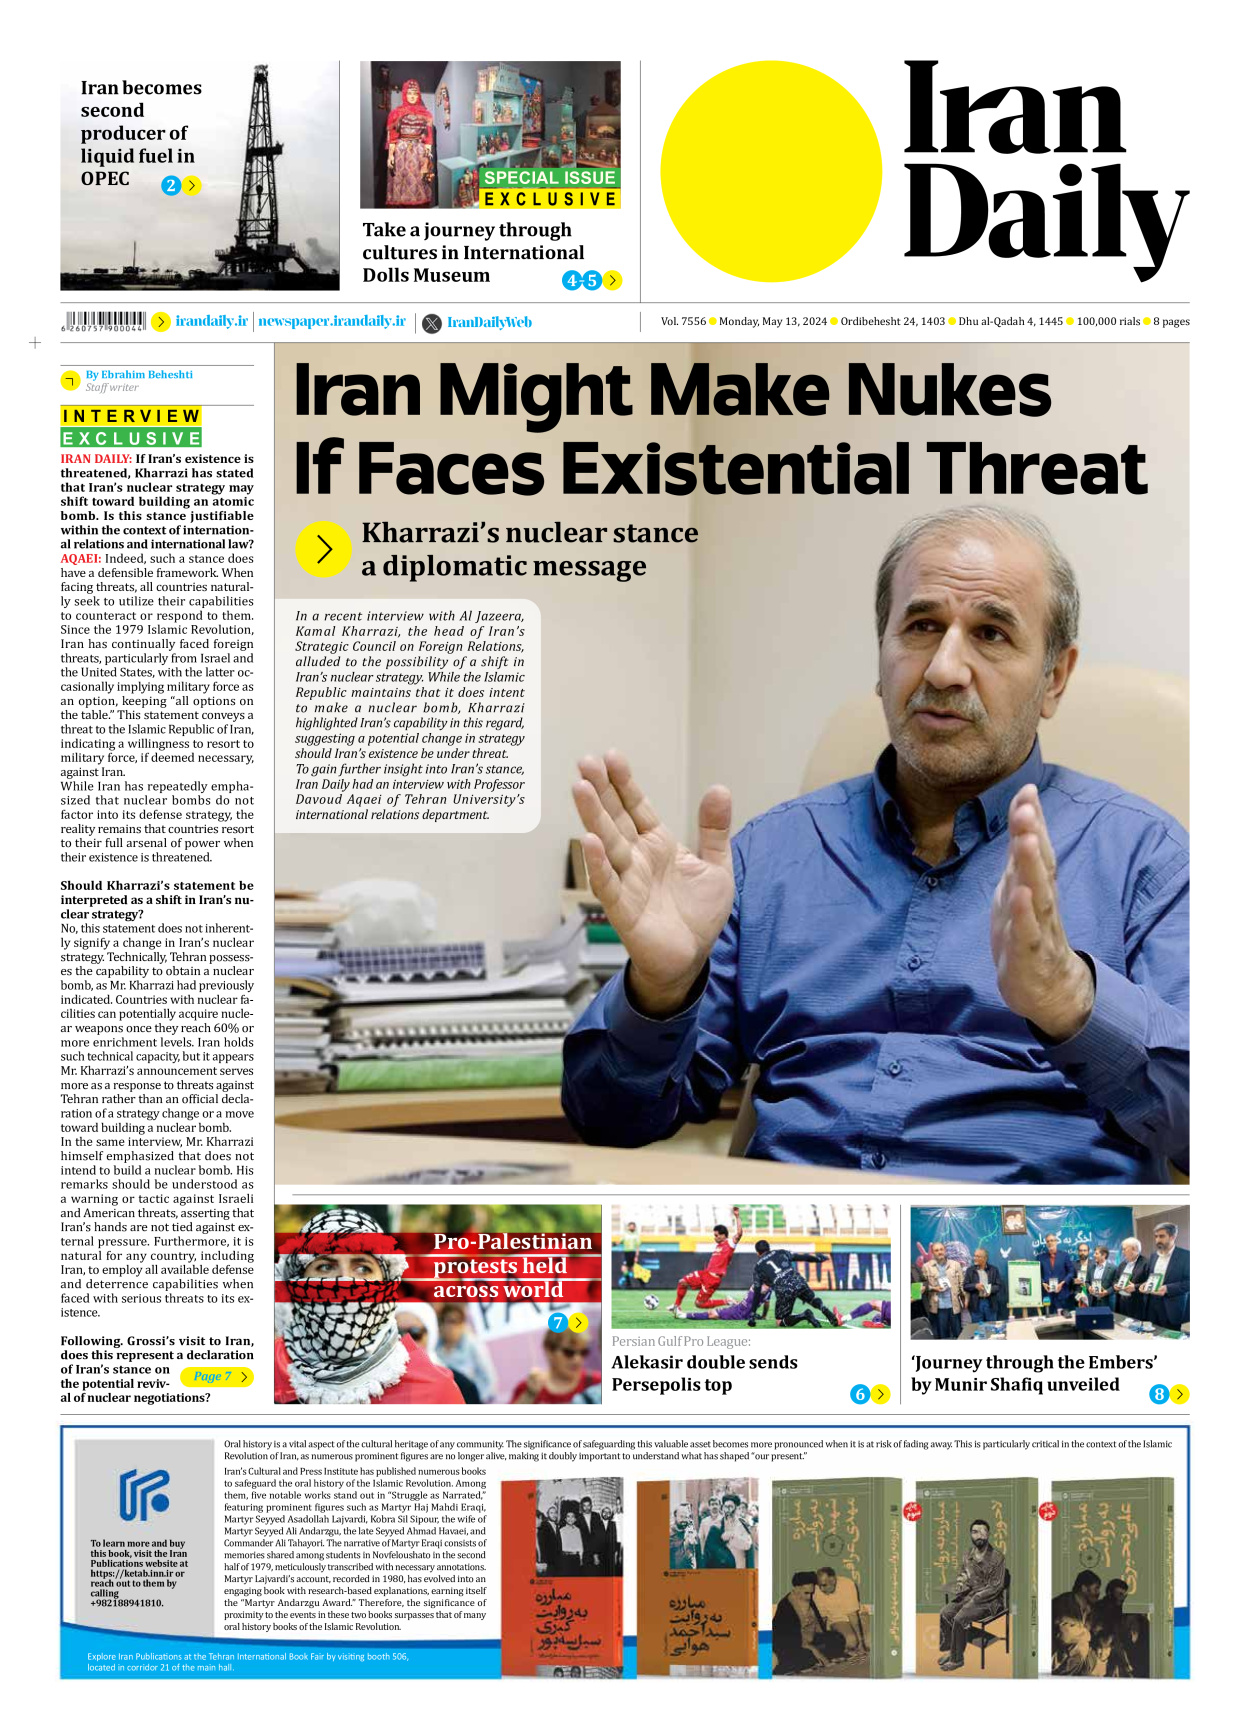 Iran Daily - Number Seven Thousand Five Hundred and Fifty Six - 13 May 2024